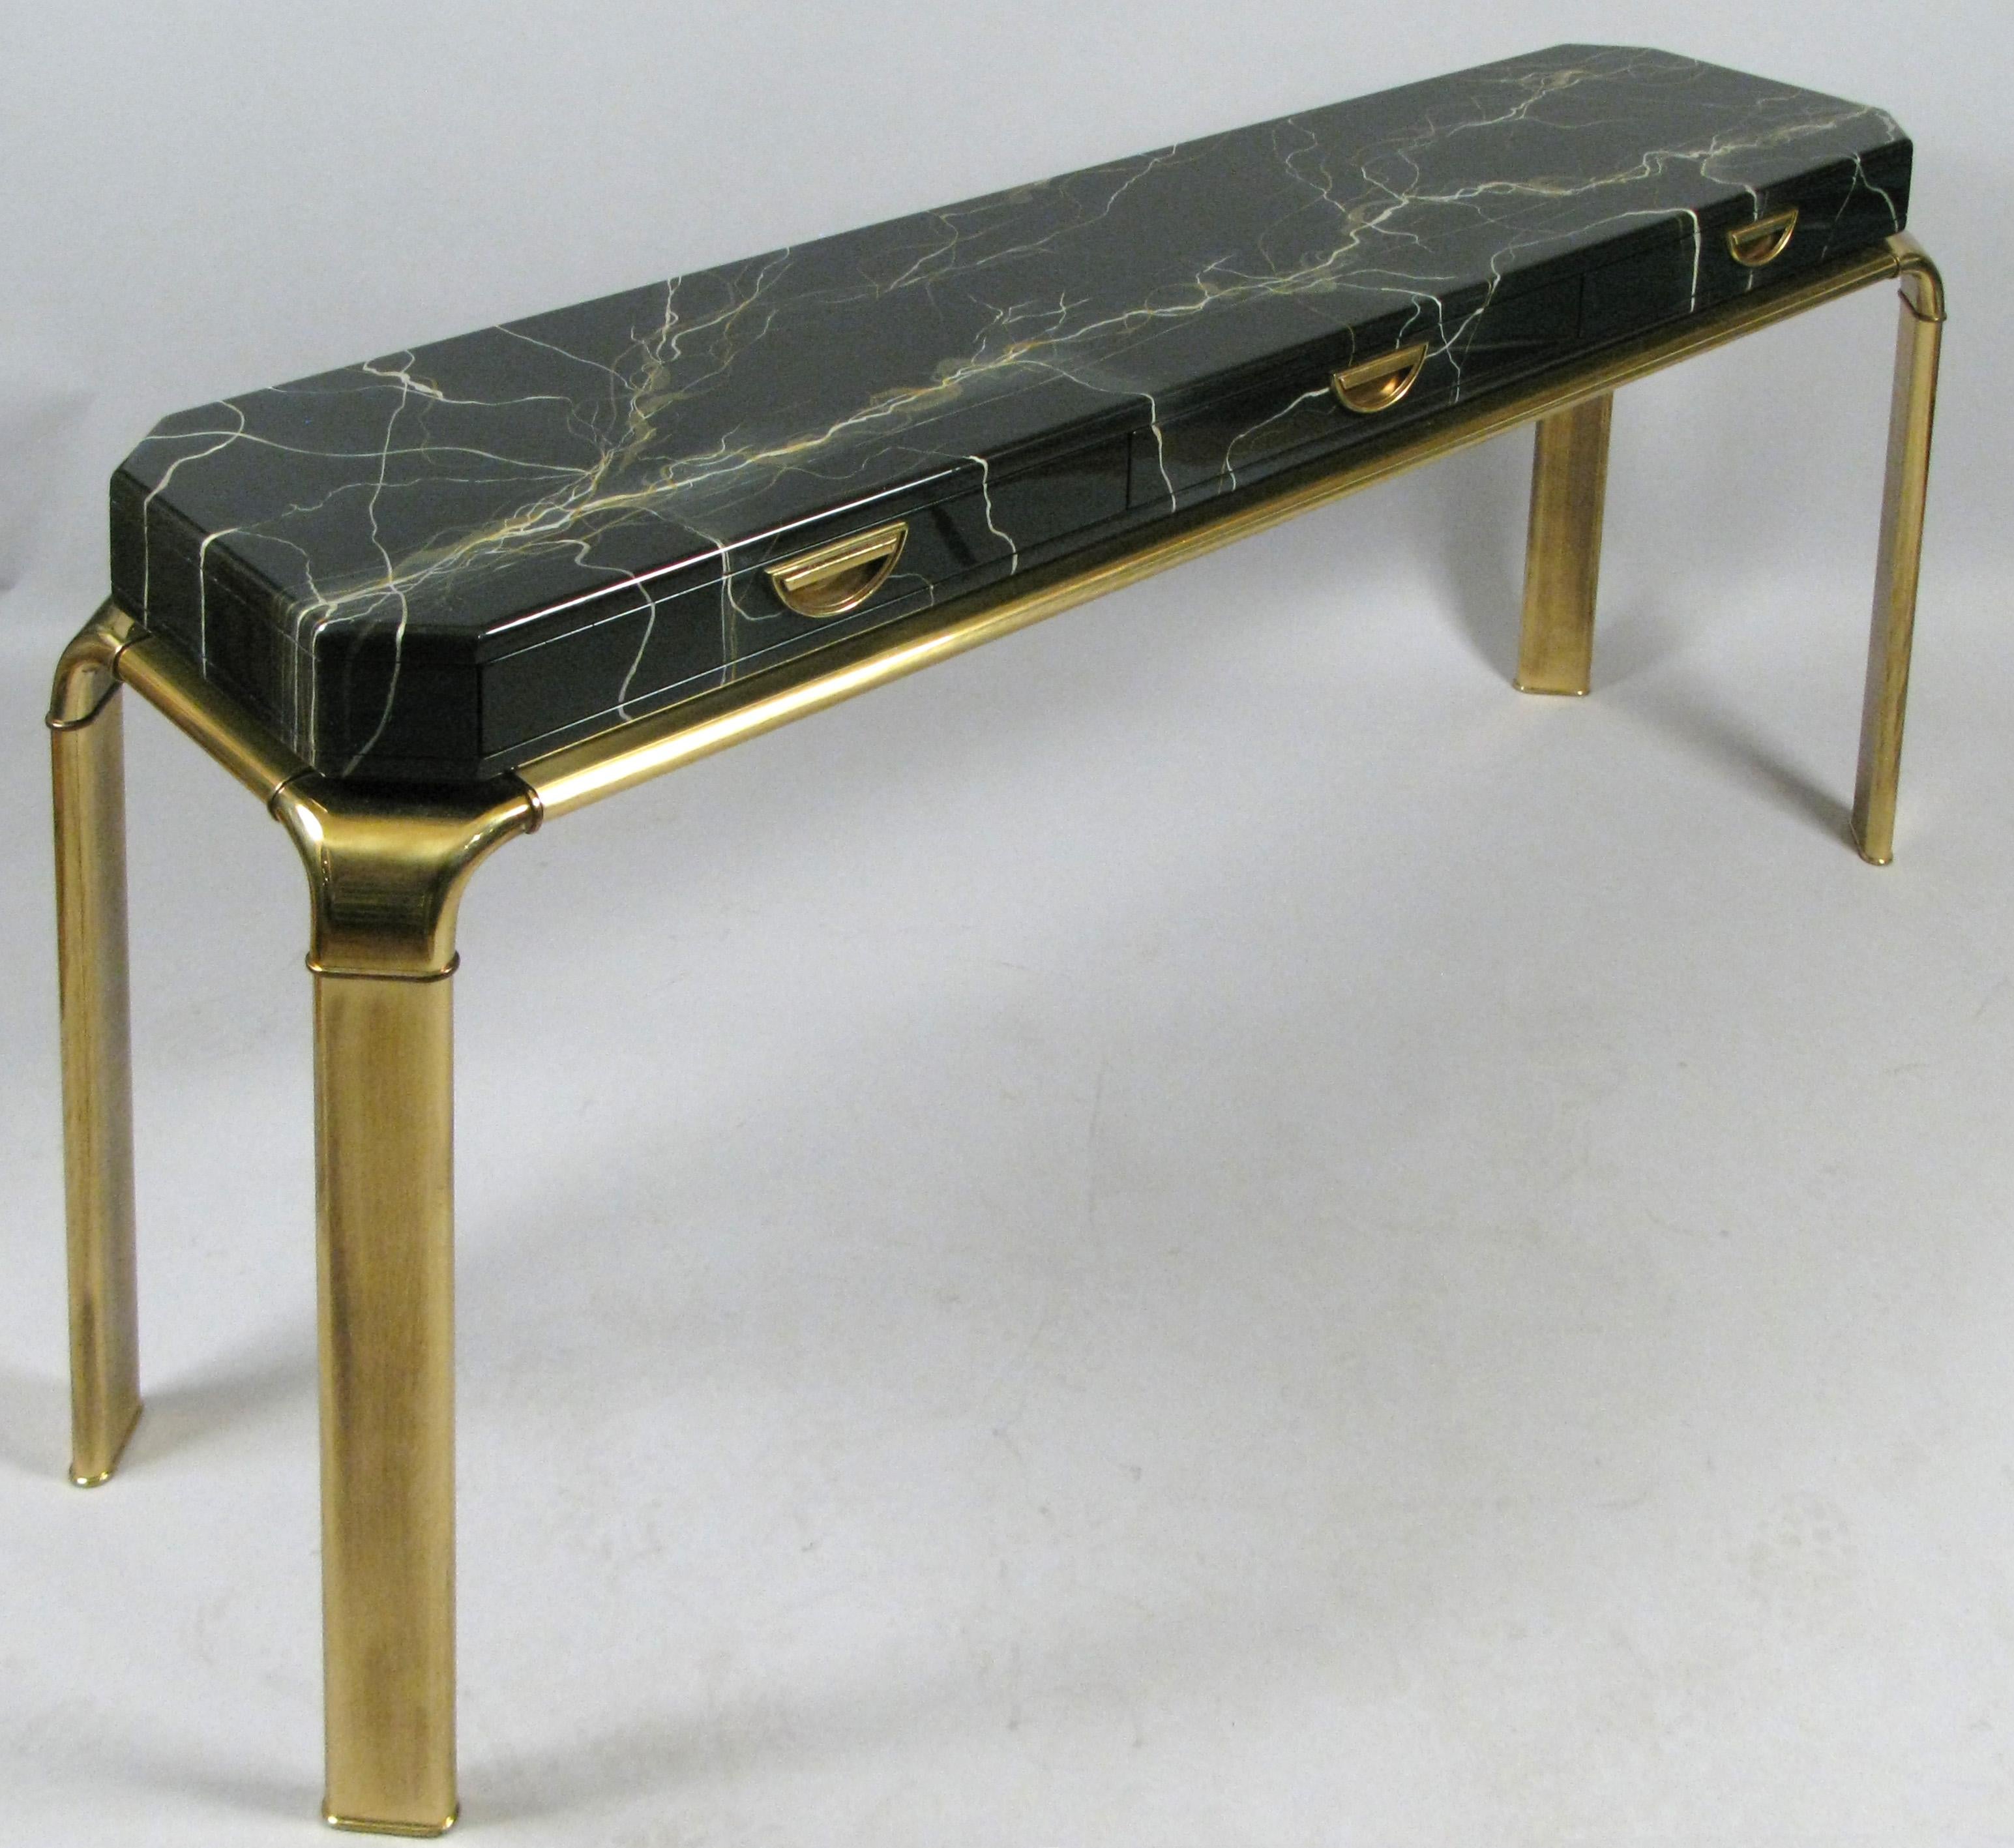 A stunning vintage 1960s console table with three drawers with a brass base by Widdicomb. the case is expertly finished with a faux marble finish making it very convincingly appear as a slab of beautifully grained black marble. the three drawers